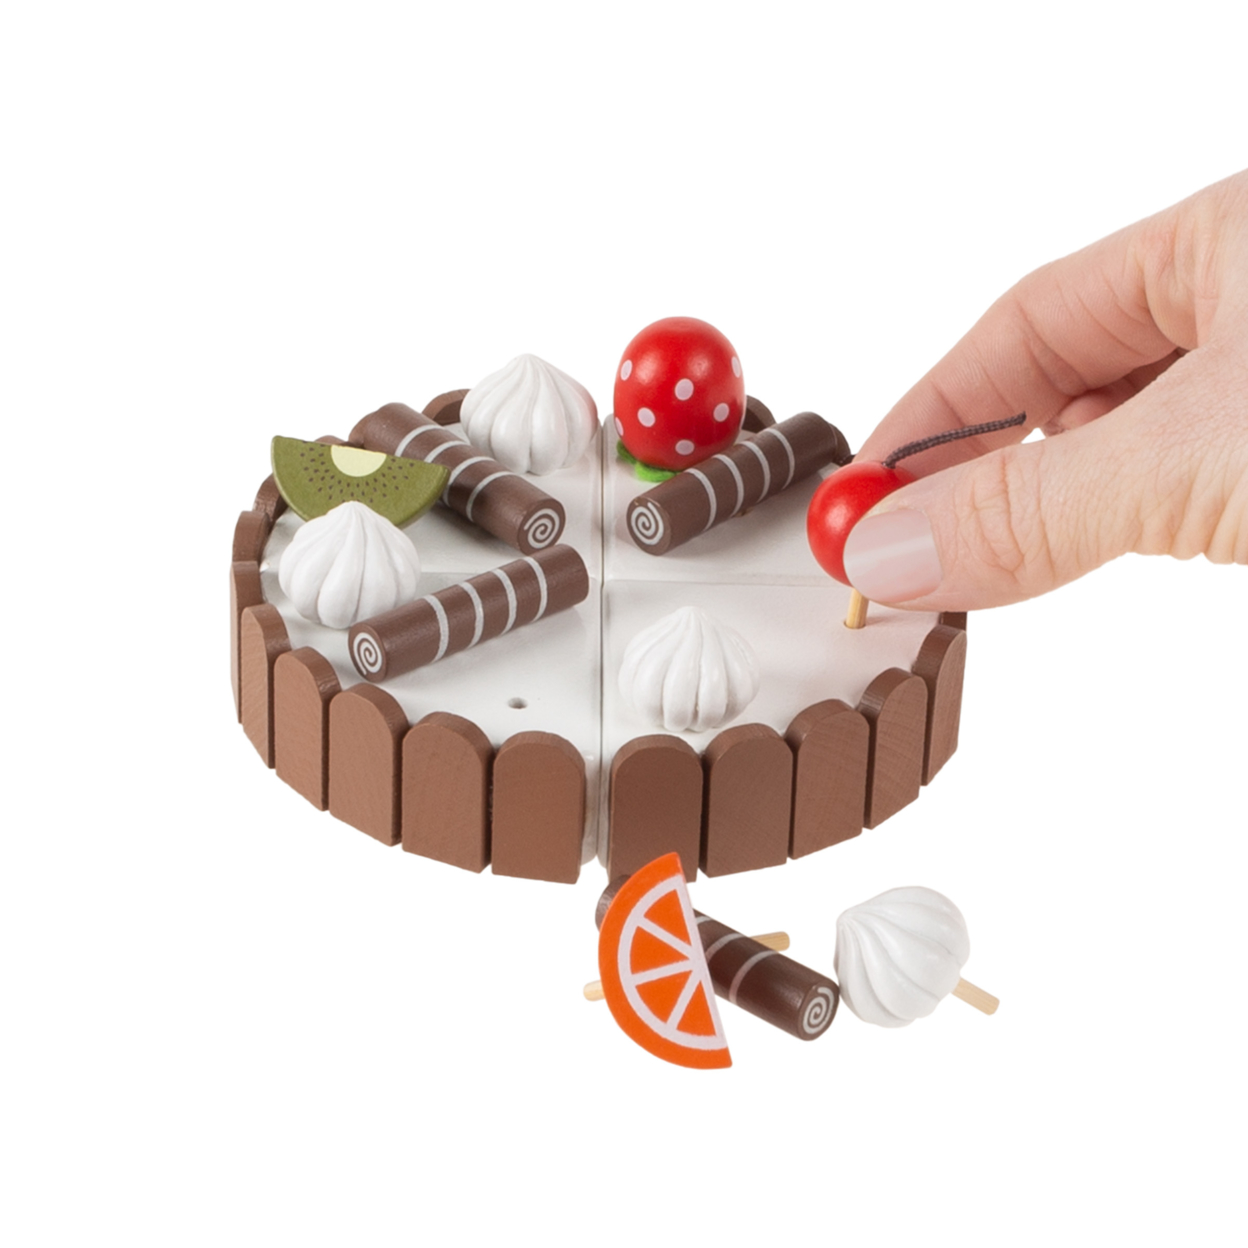 Birthday Cake-Kids Wooden Magnetic Dessert With Cutting Knife, Fruit Toppings, Chocolate And Vanilla Swirls